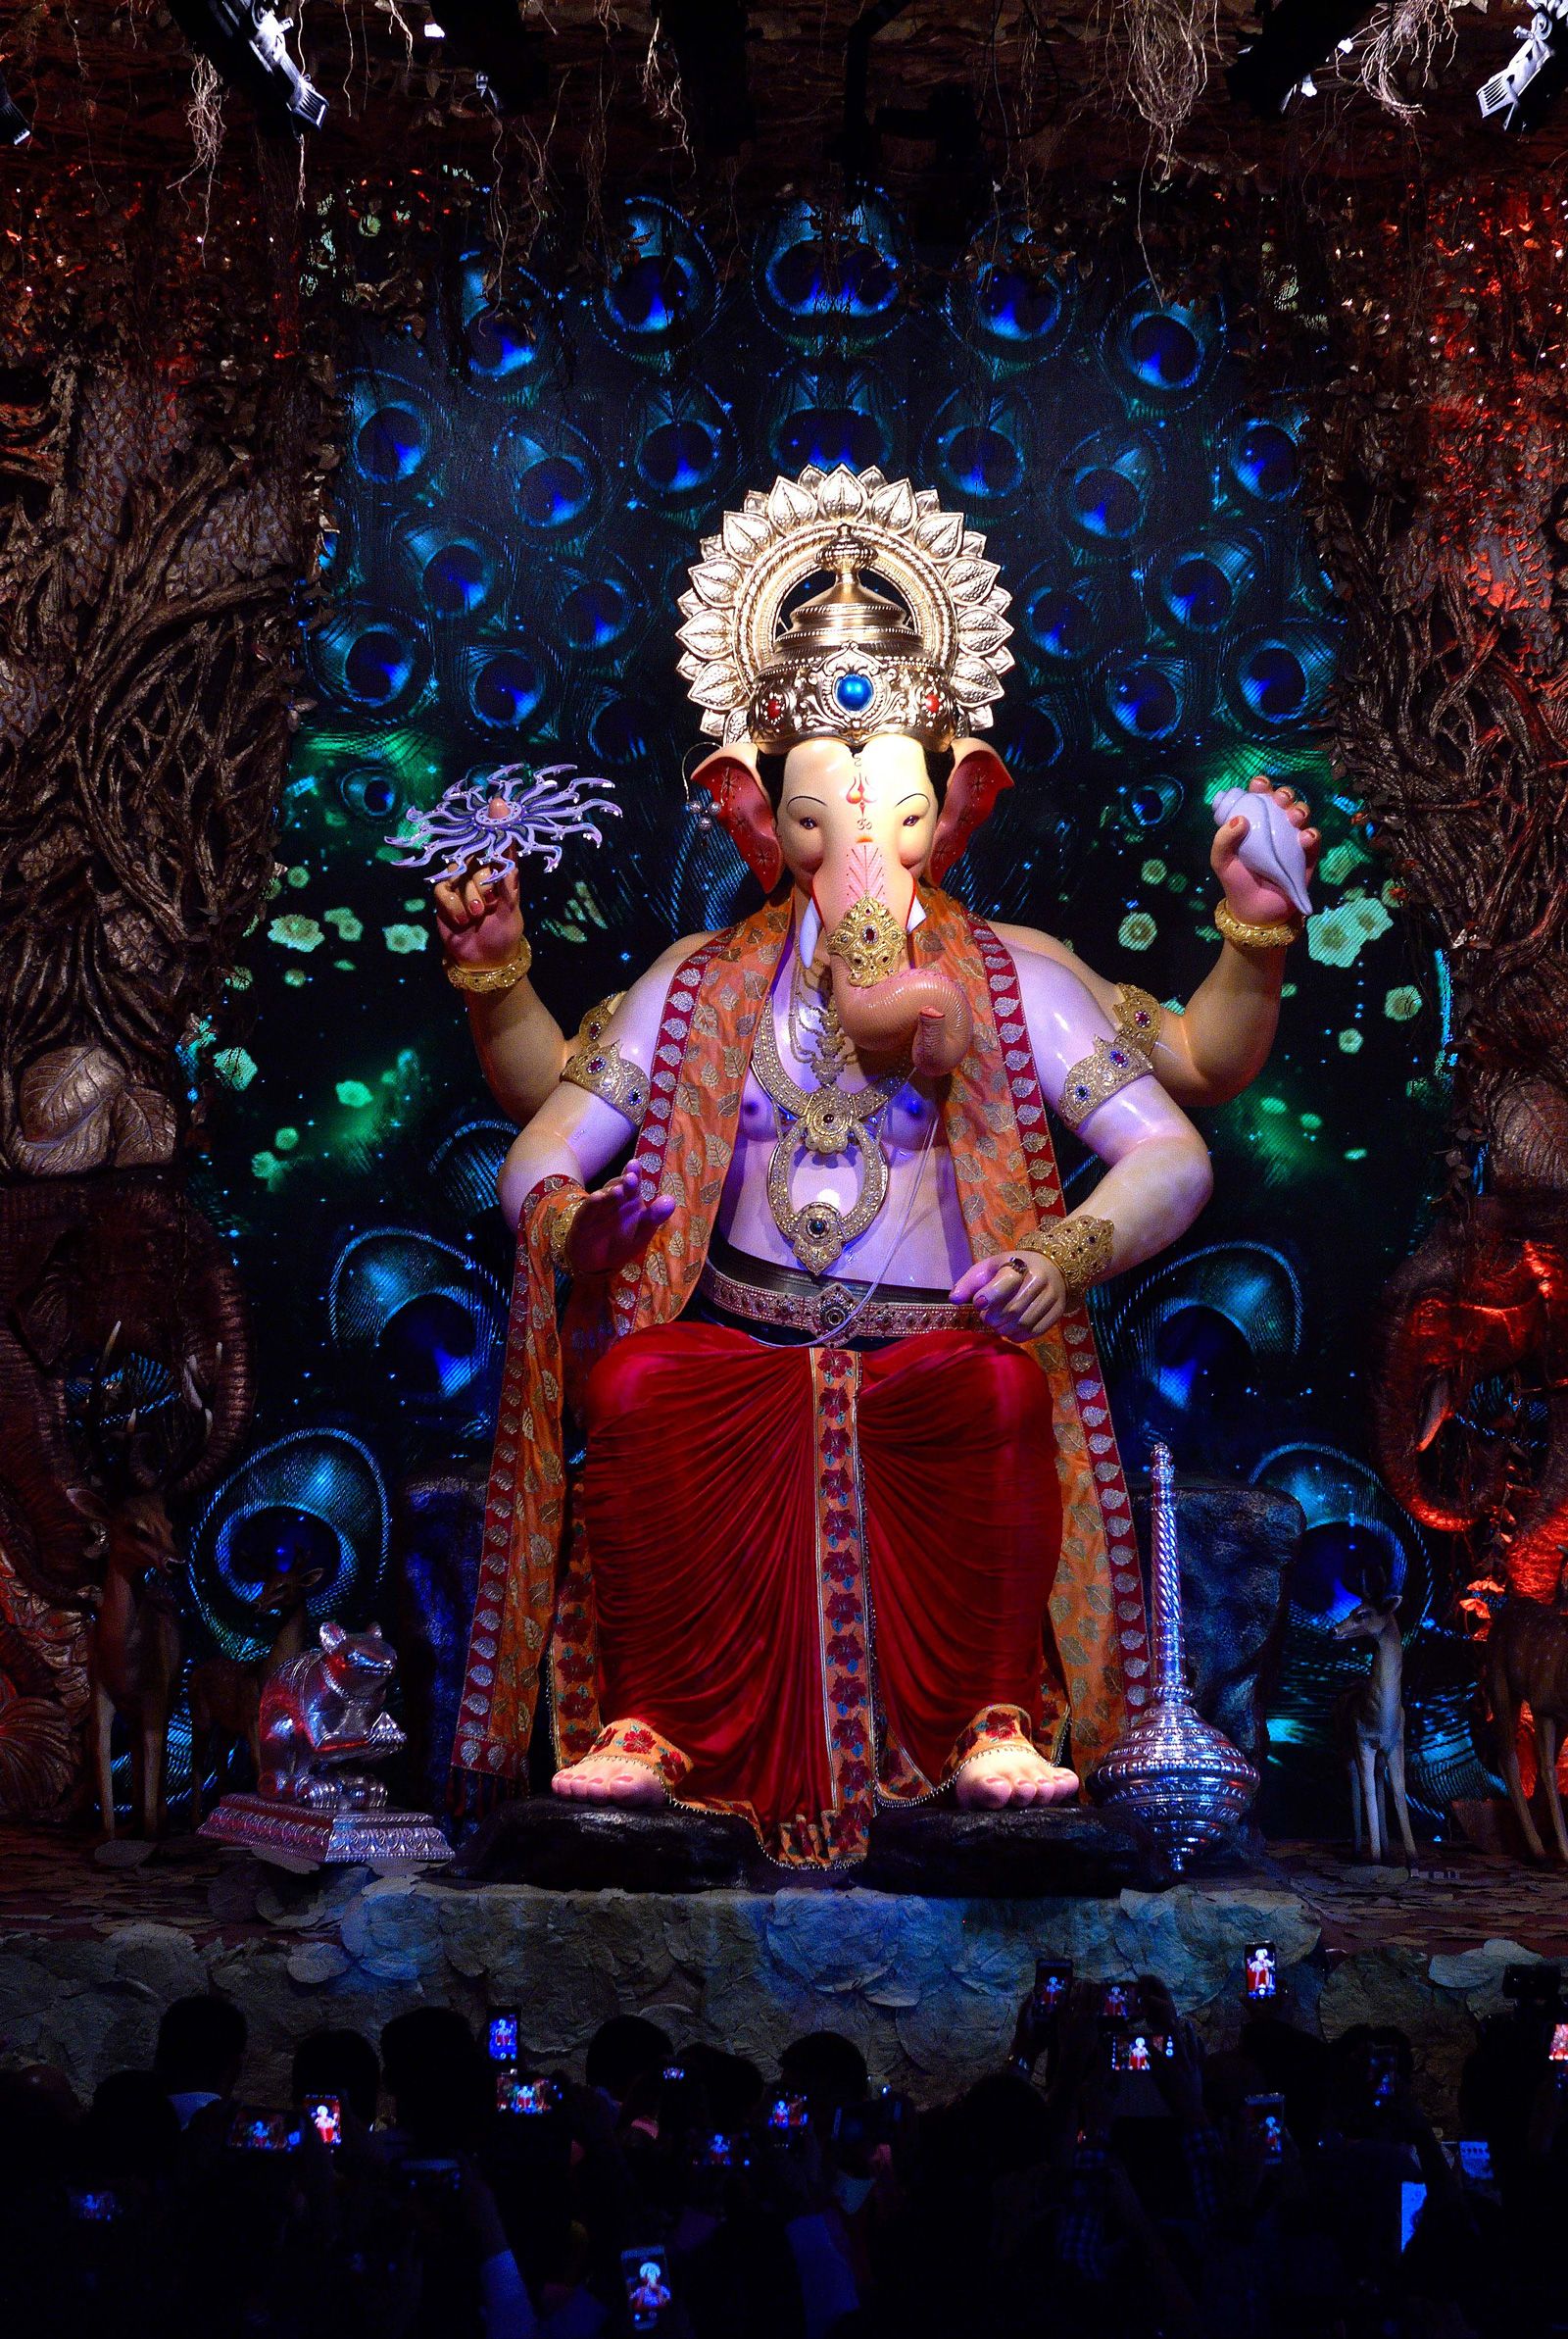 Lalbaugcha Raja 2018: Darshan timings, photo, queues and everything else you need to get blessed. Condé Nast Traveller India